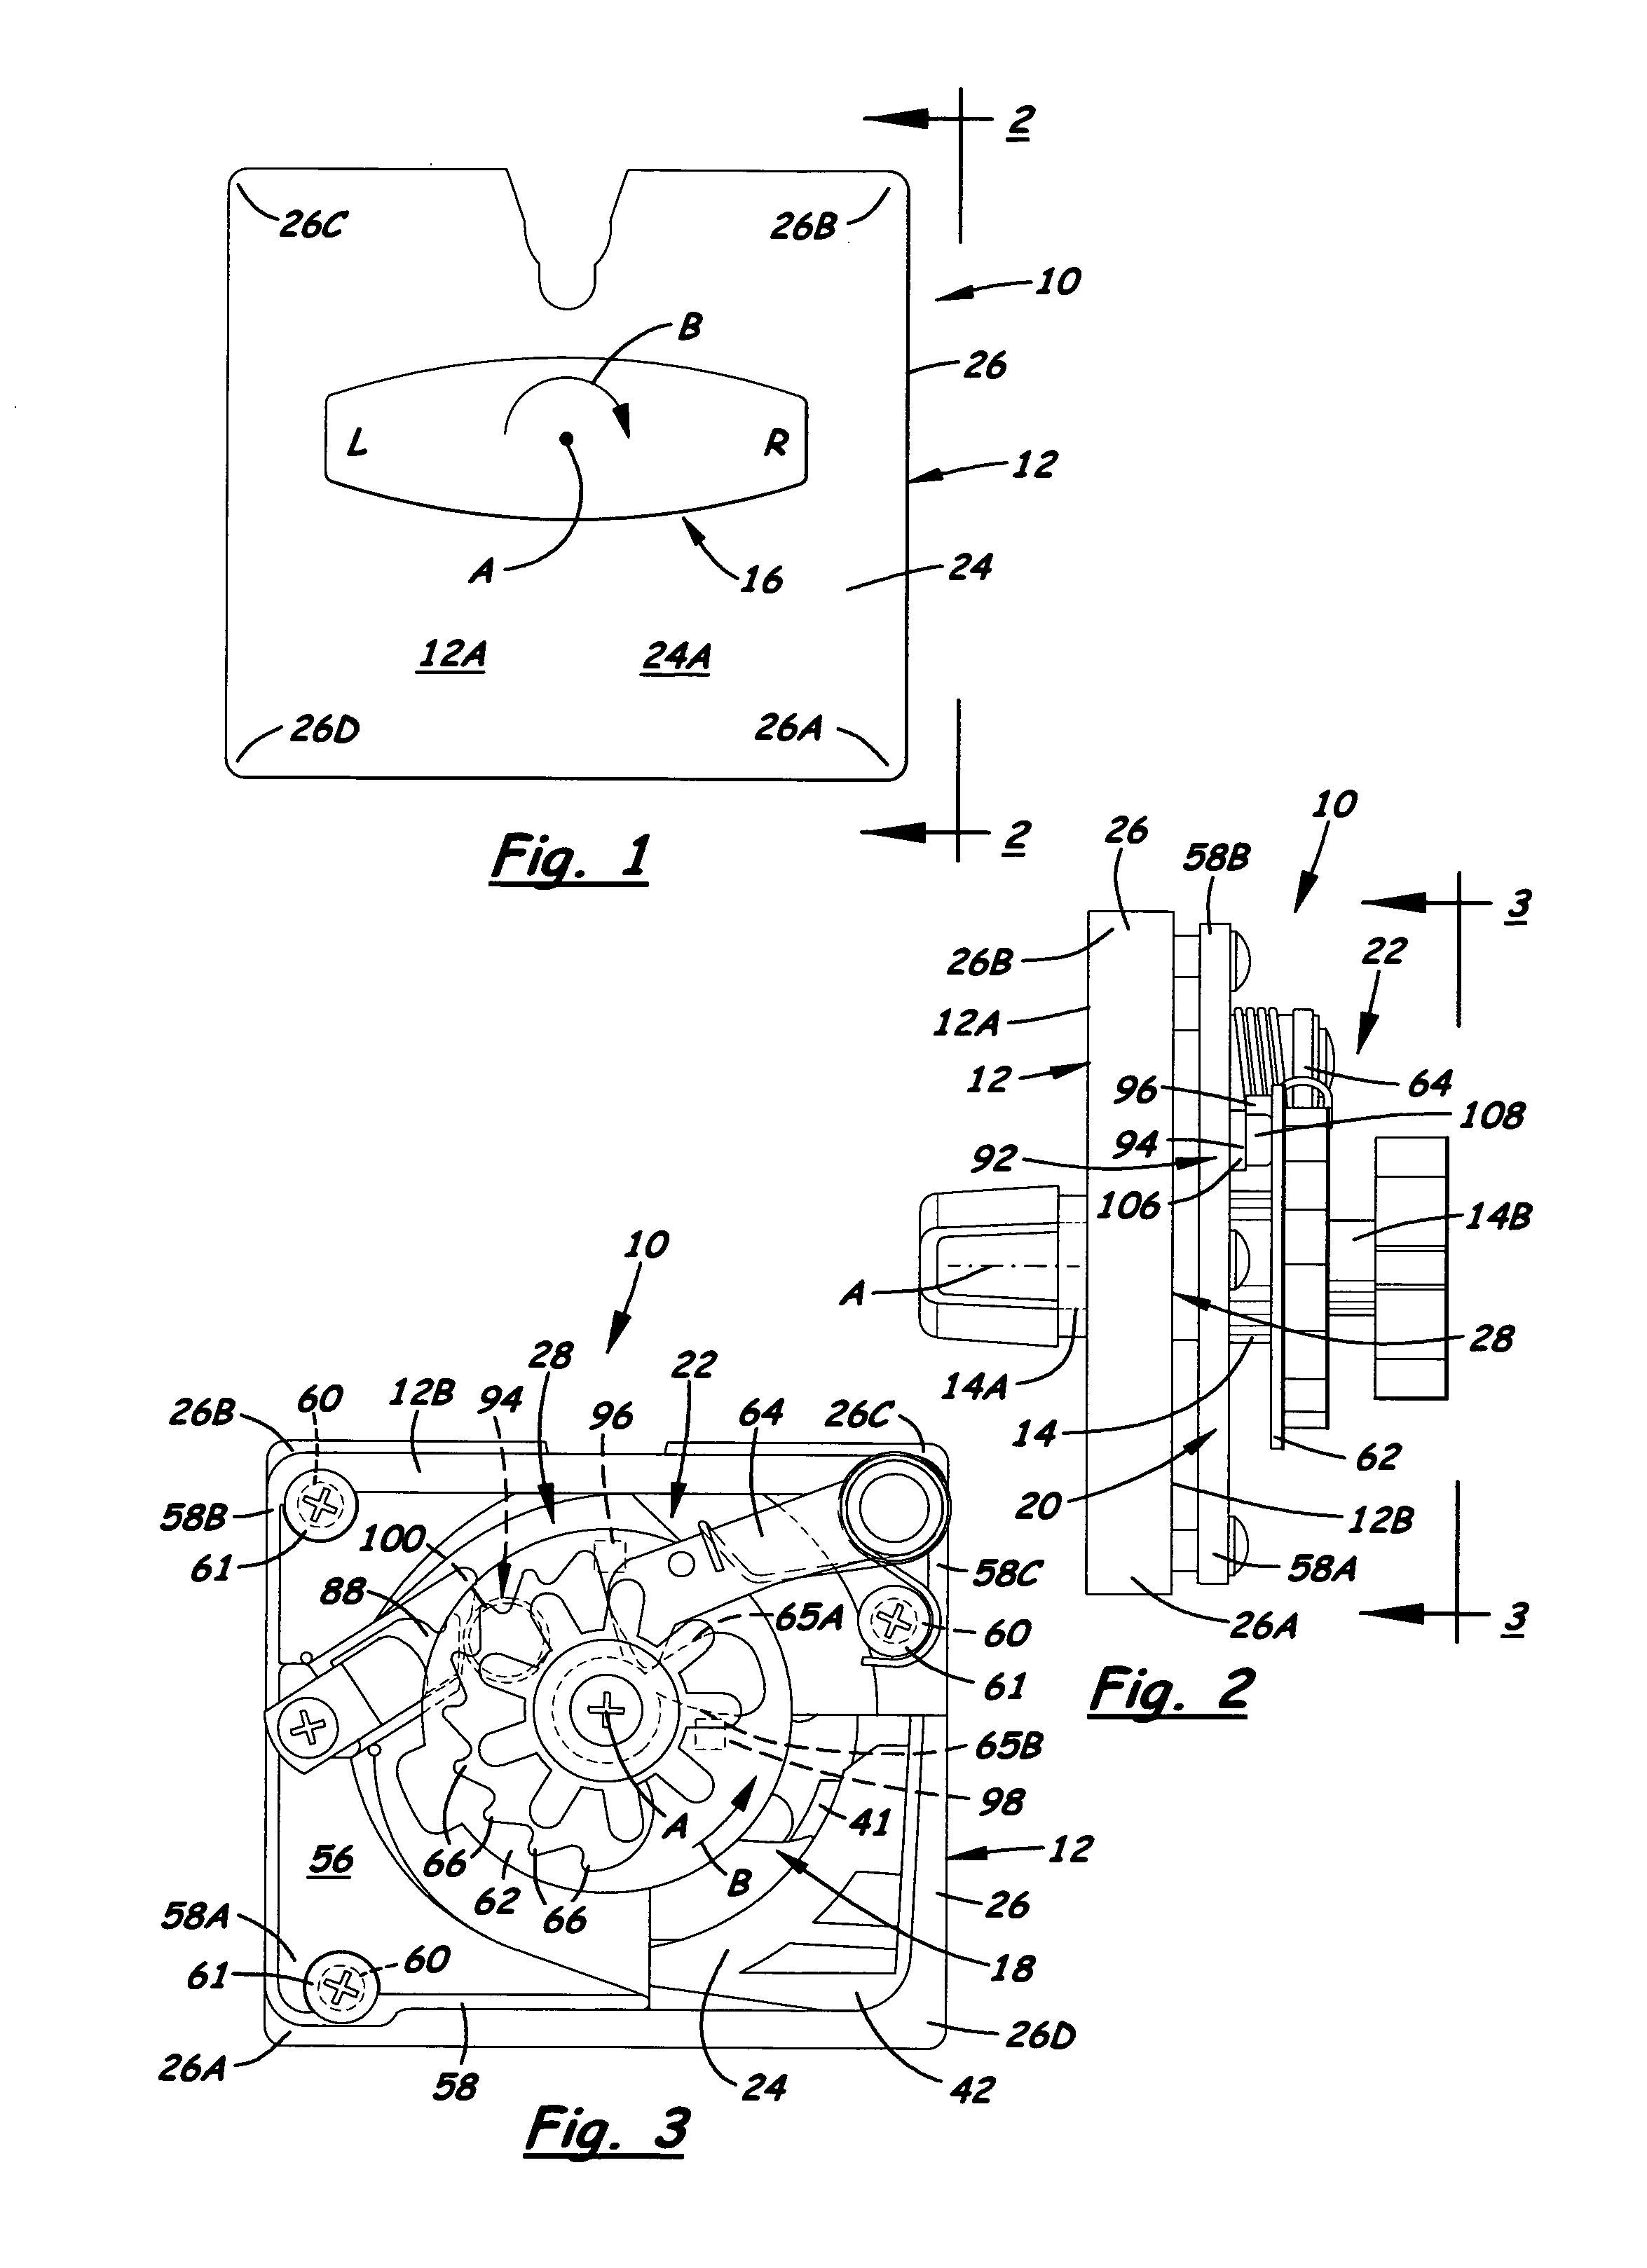 Multi-coin operated actuation mechanism